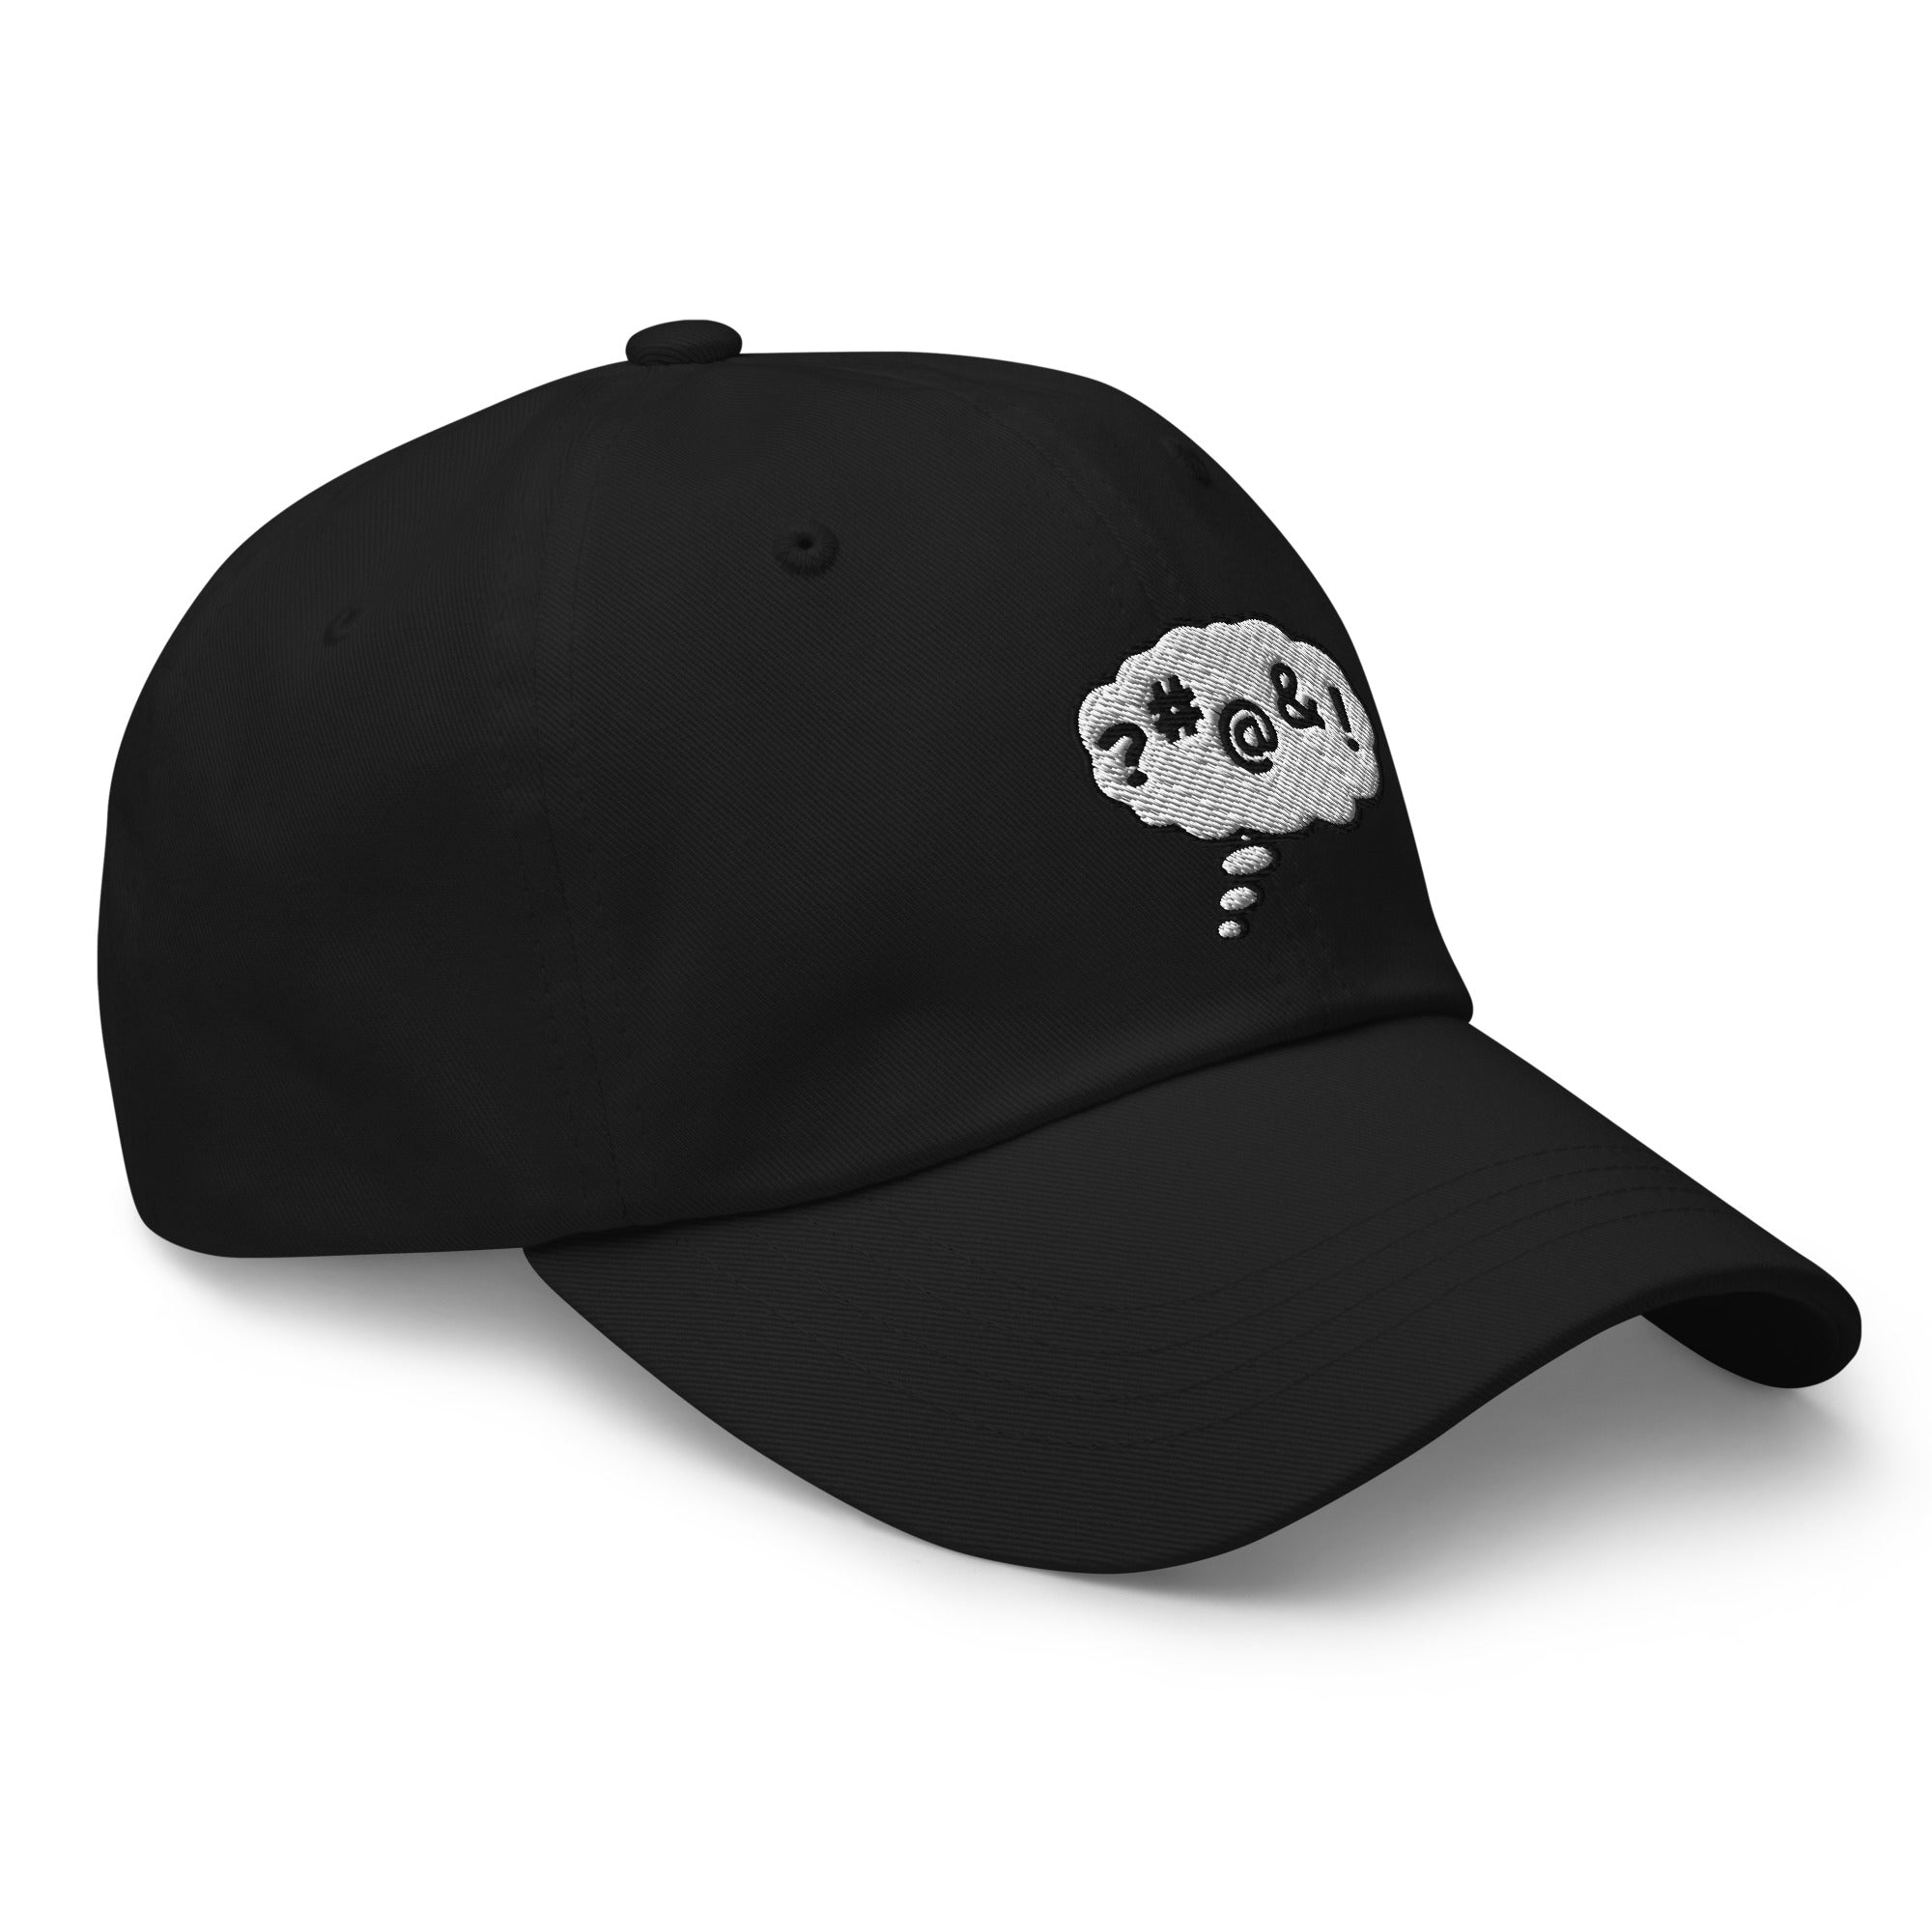 Anime Comic Bubble Explicit Language Embroidered Baseball Cap Dad hat - Edge of Life Designs